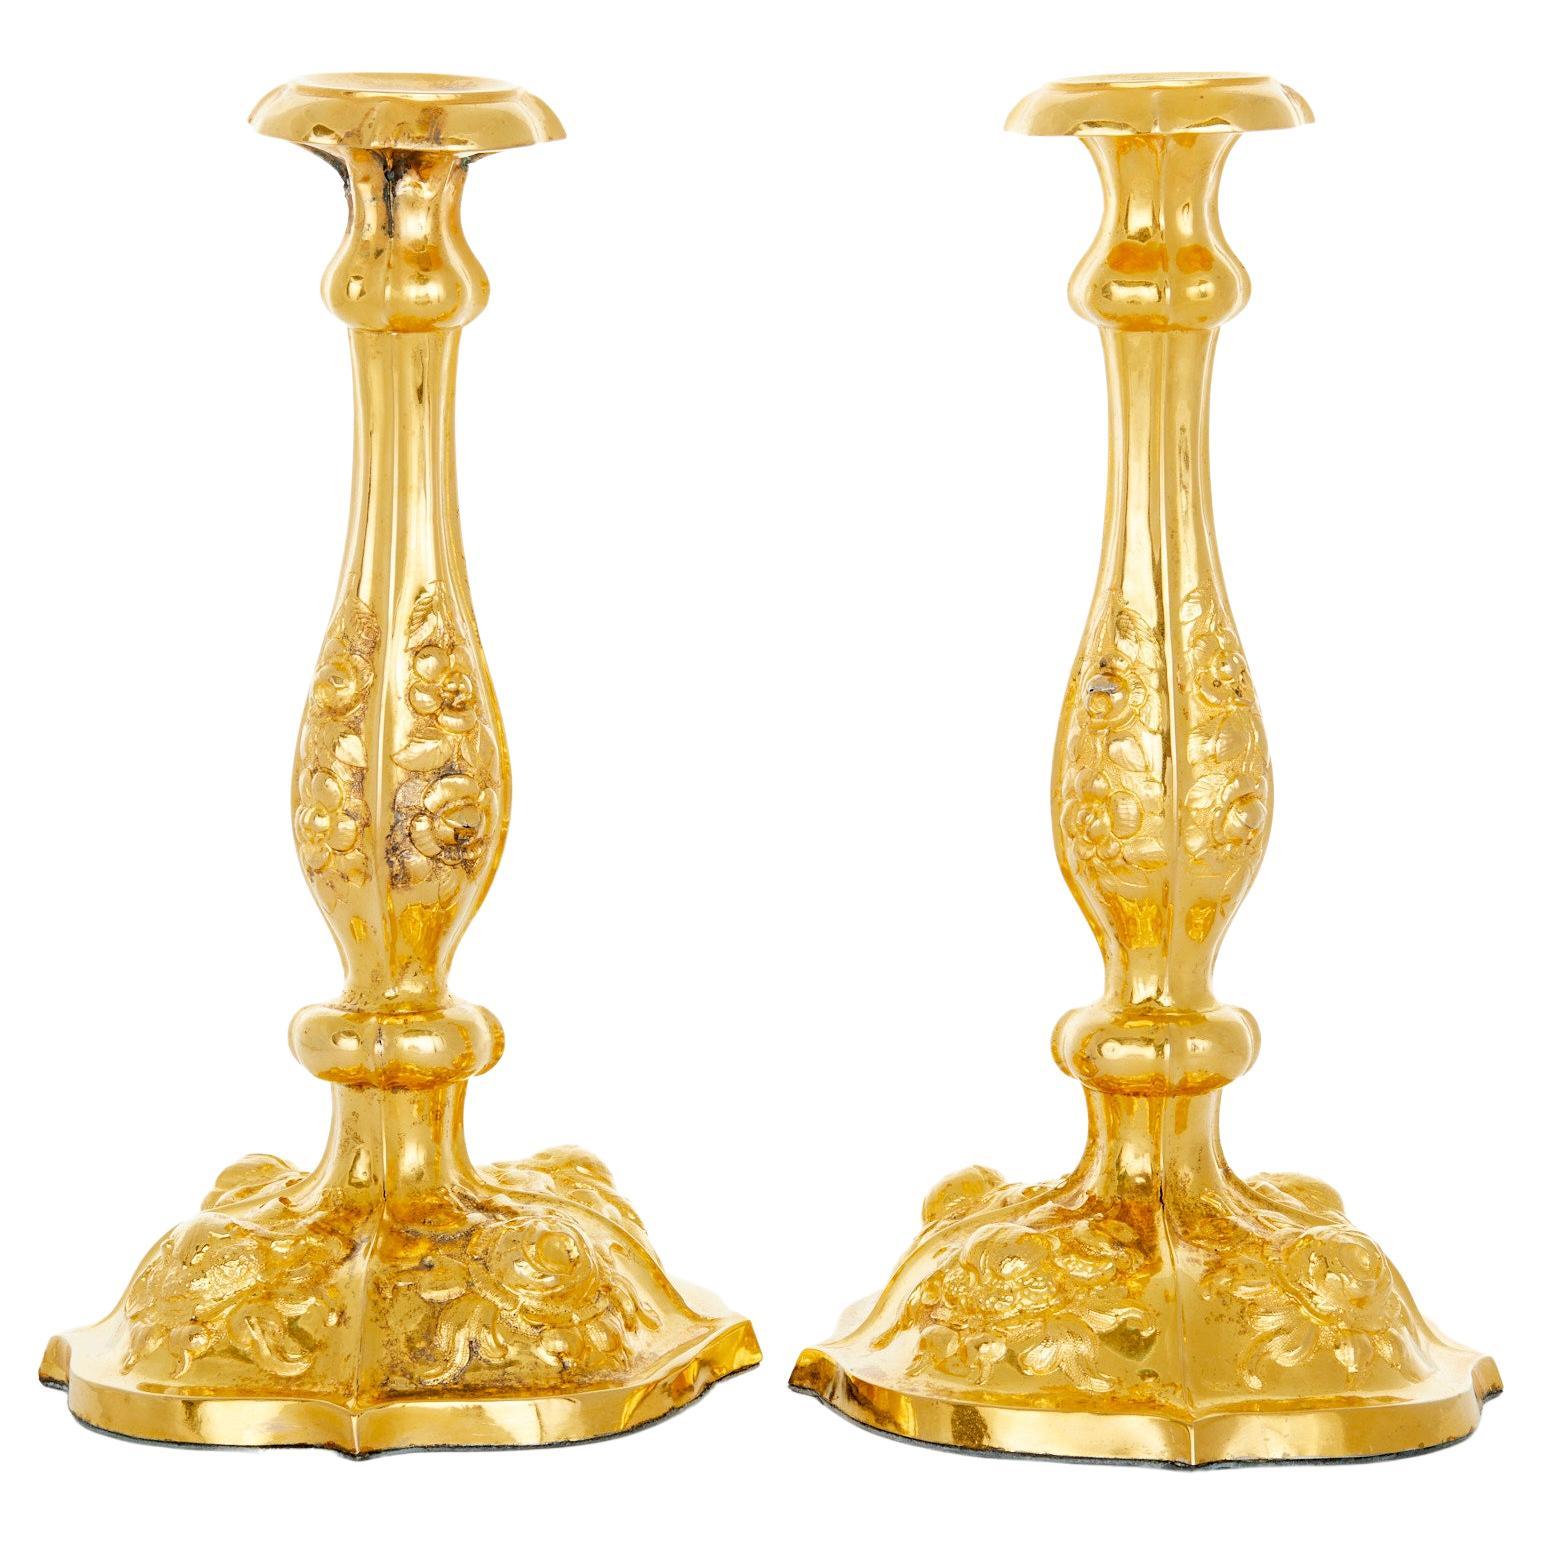 Tiffany & Co. Silver / Gilt Pair Continental Candlesticks For Sale